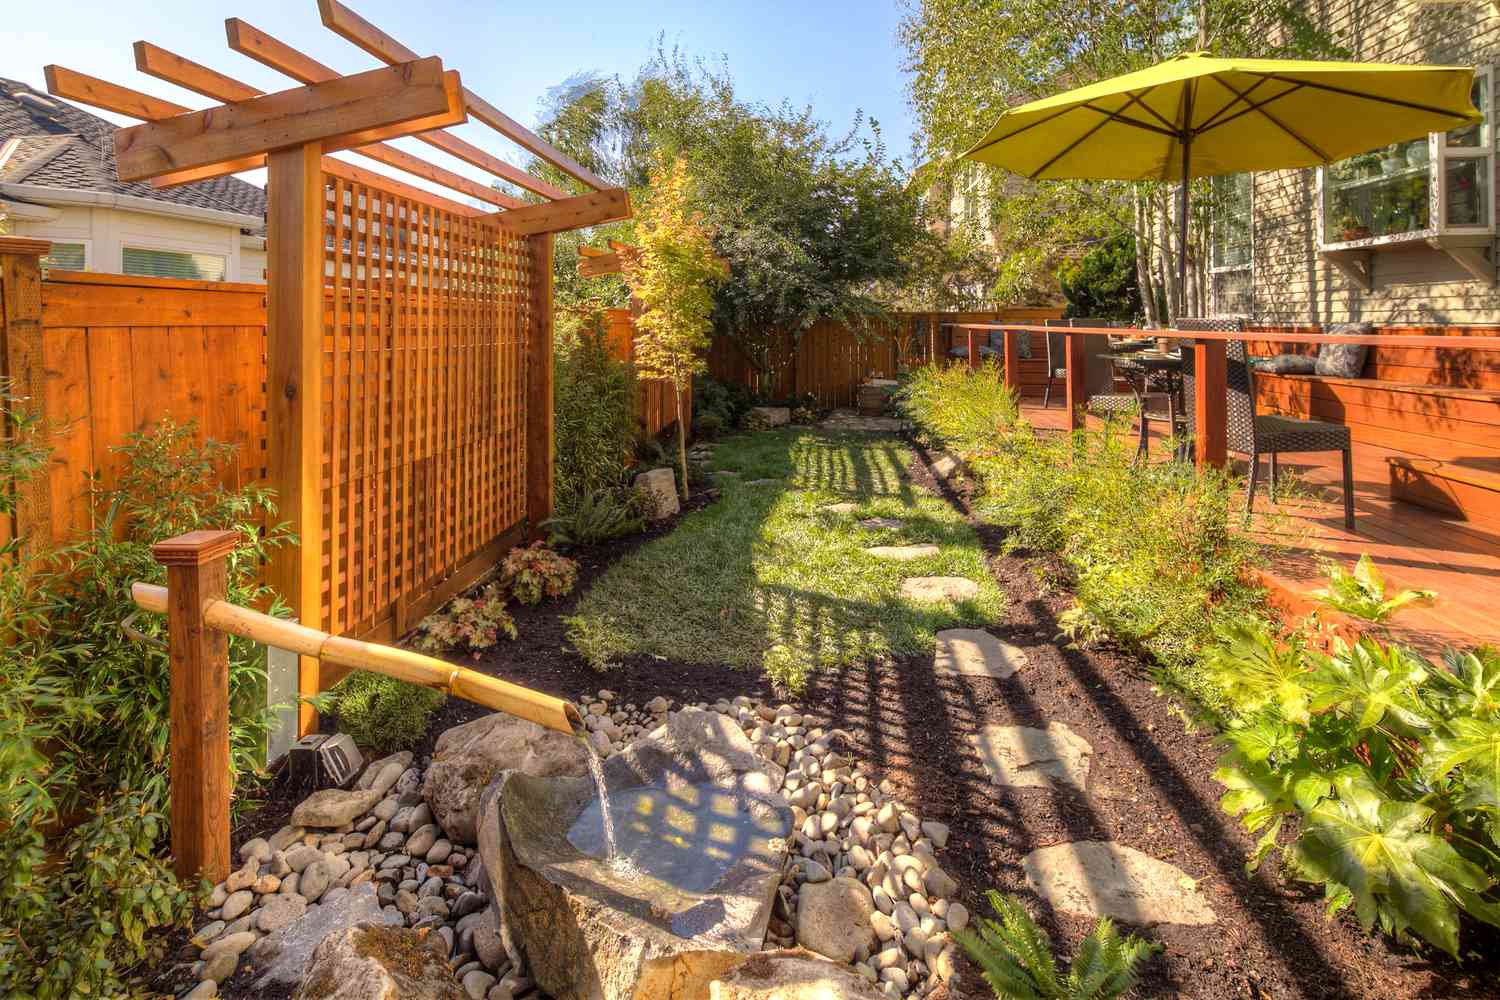 18 Go for an entirely natural garden fence